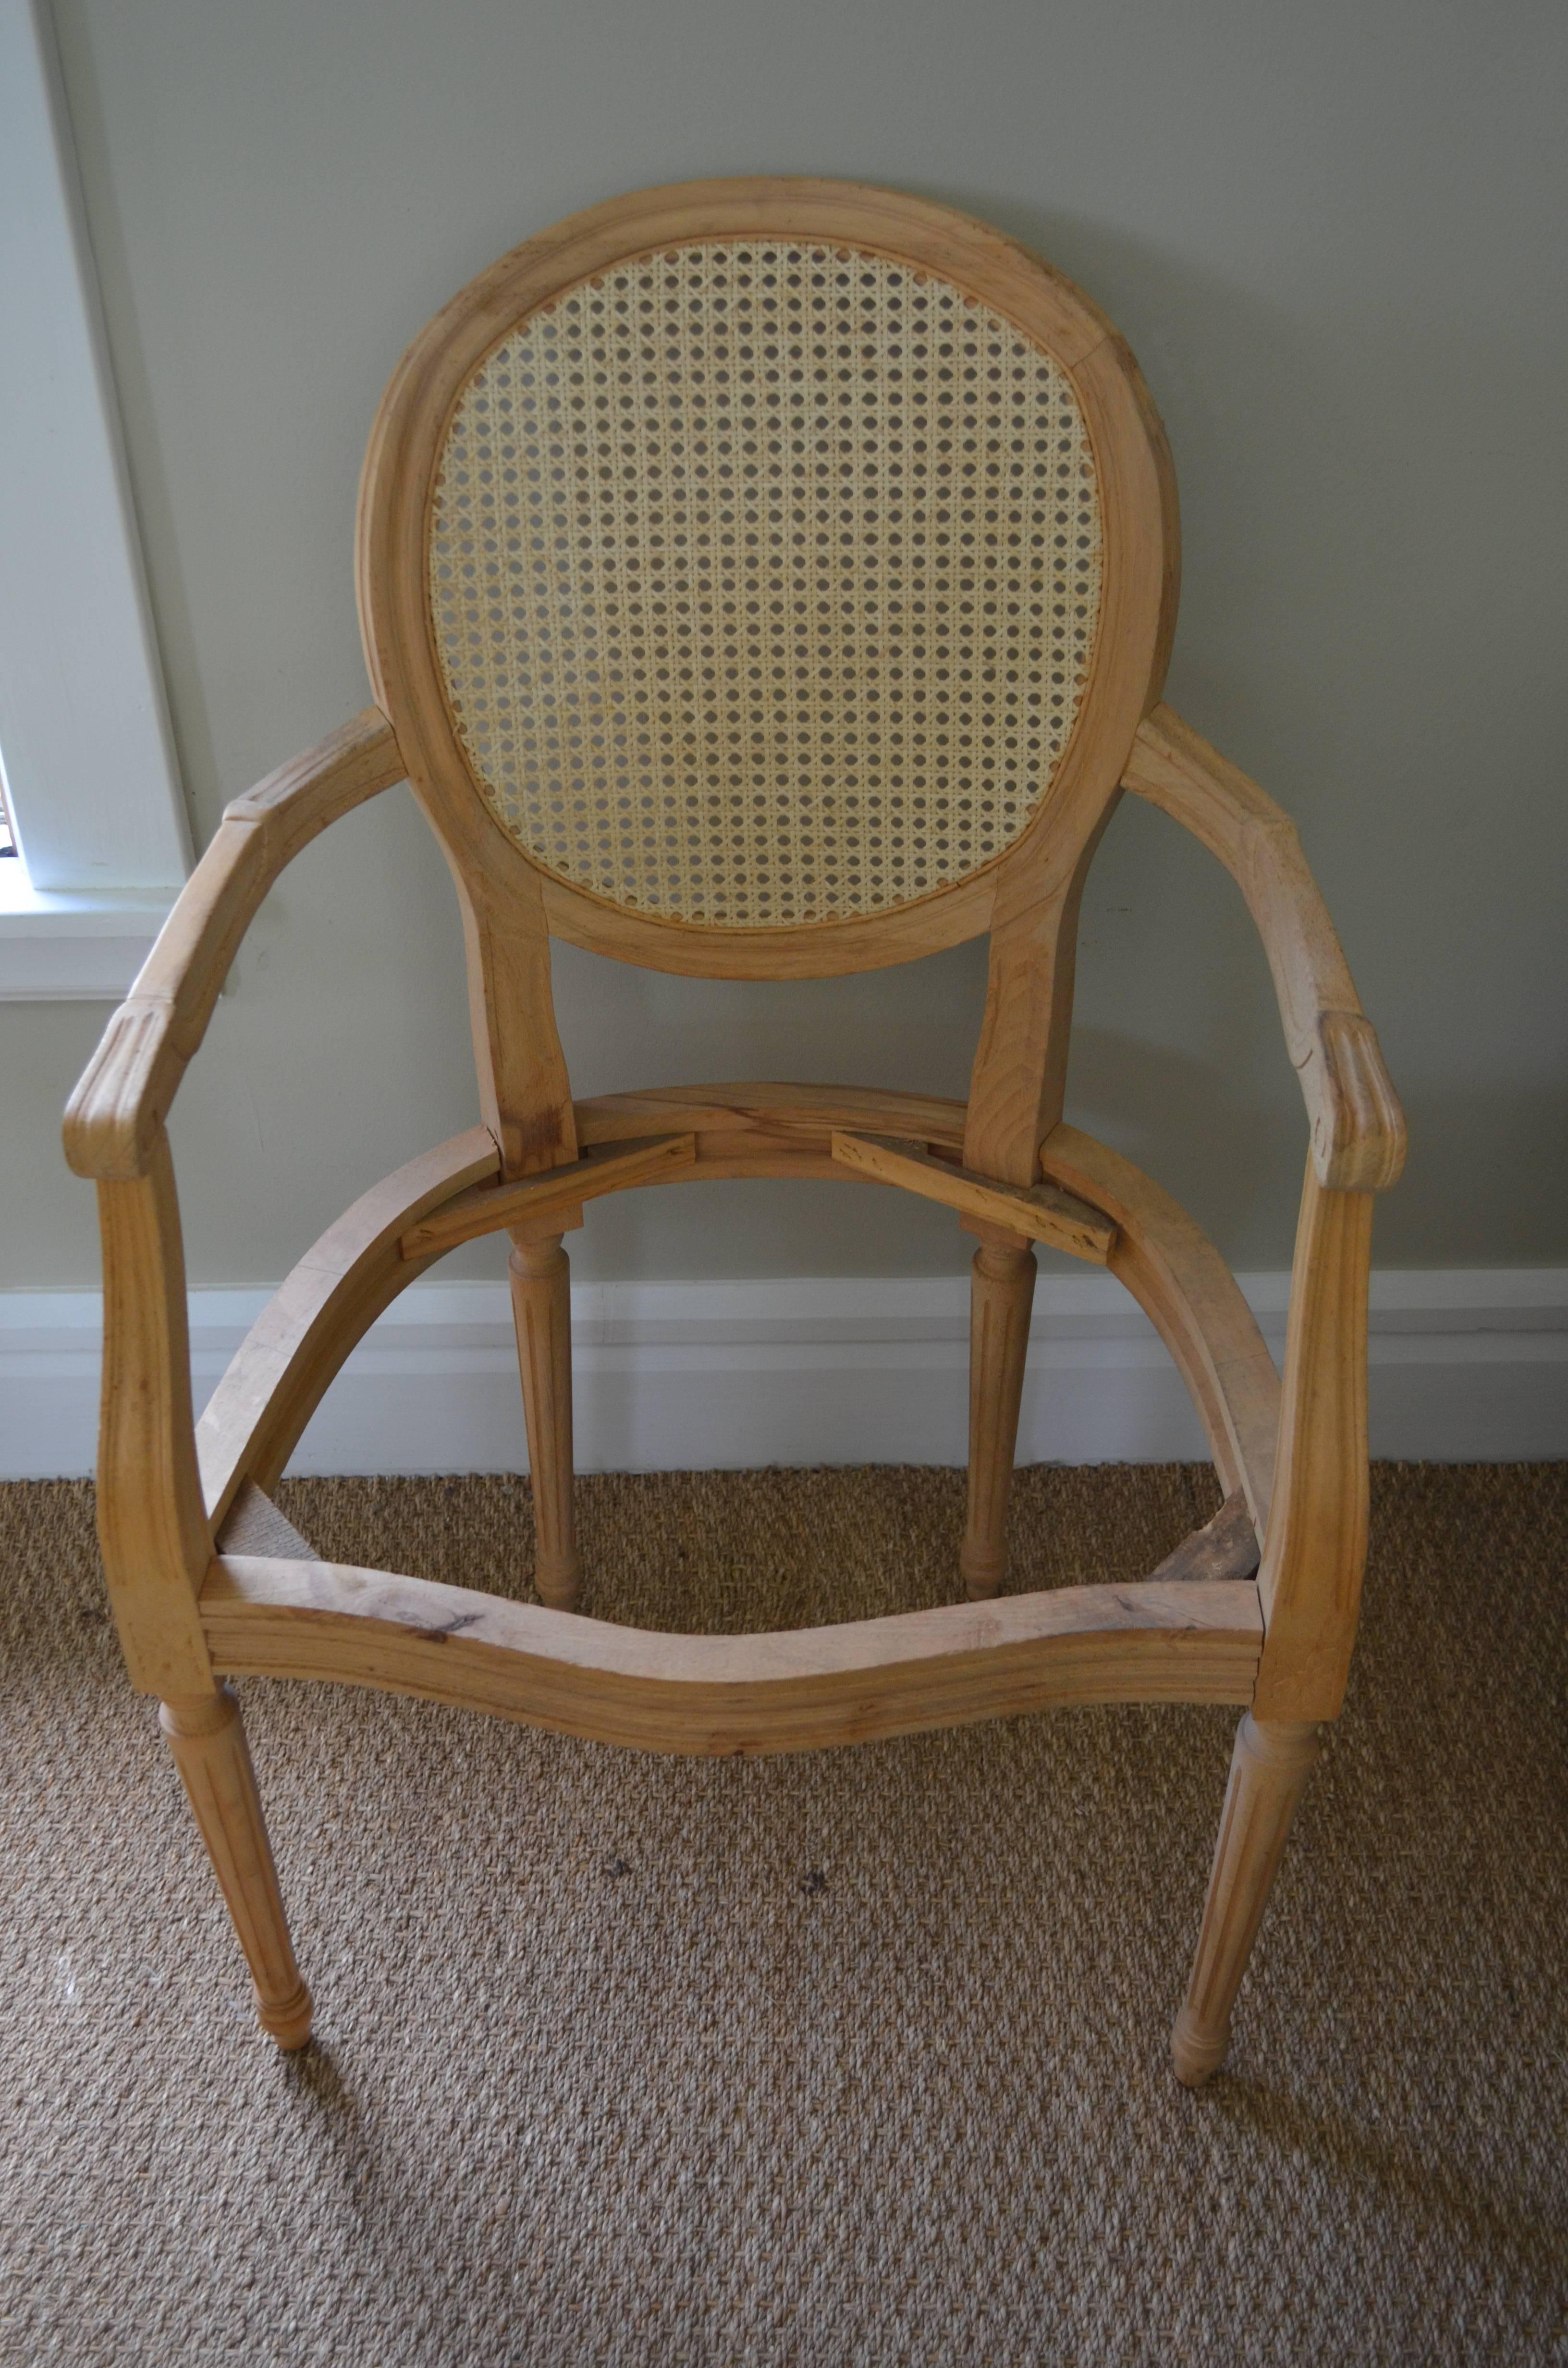 Dining chair for home or restaurant, circa 1950s, 40 available. Constructed by hand with hand-carved detail in French country style. Has been refurbished with new cane back, wood stripped and sanded. Ready for stain or paint and your choice of